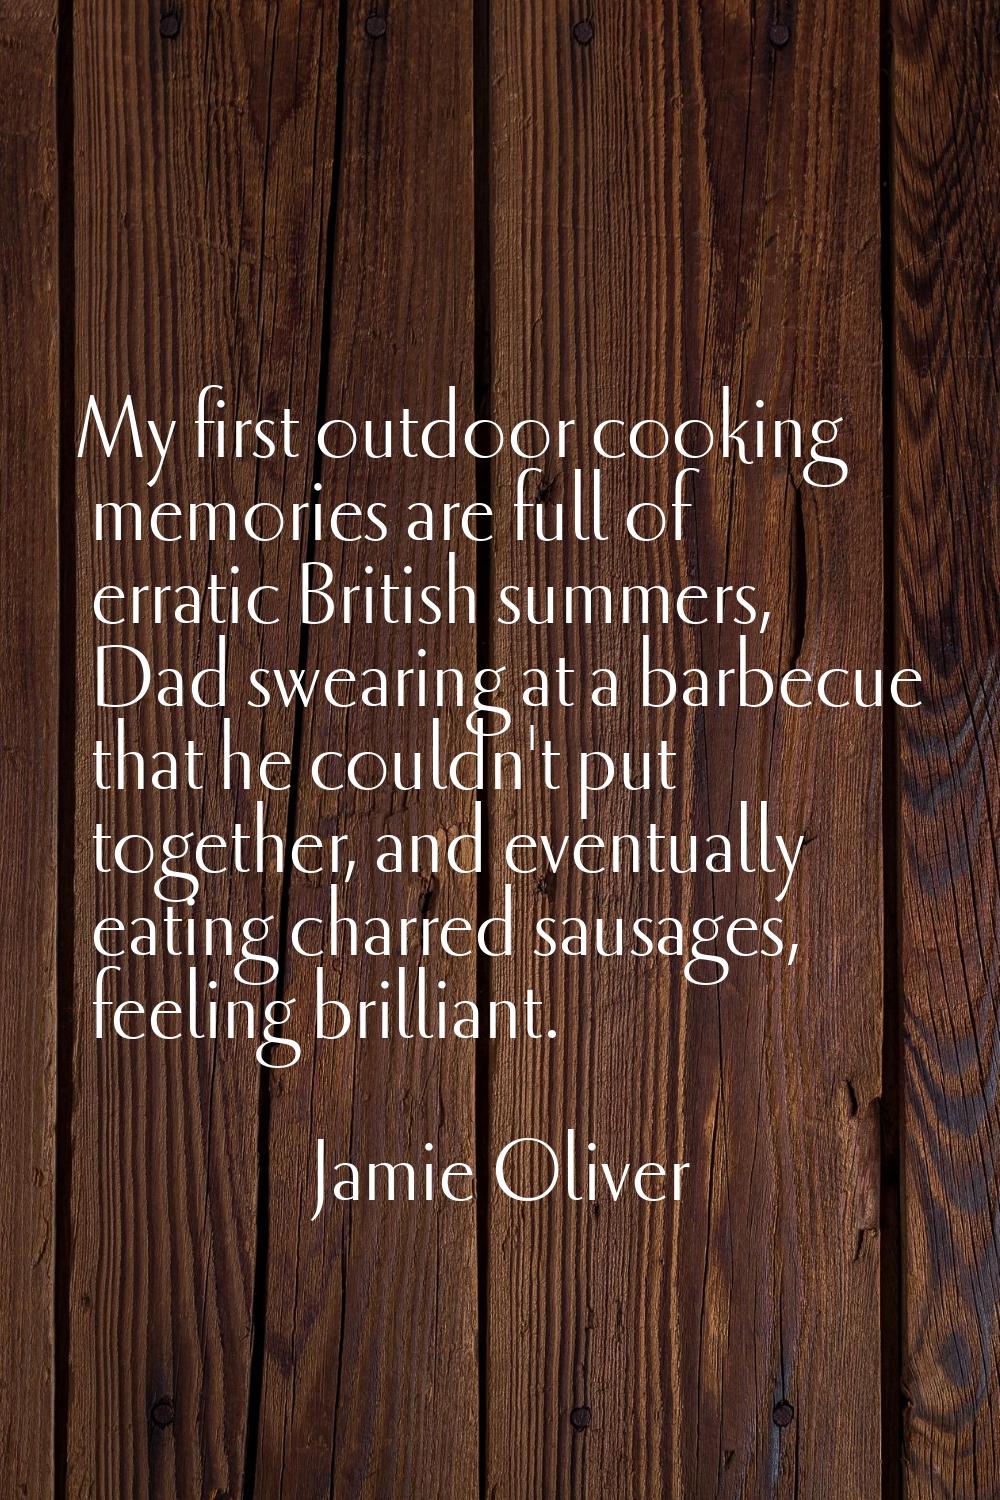 My first outdoor cooking memories are full of erratic British summers, Dad swearing at a barbecue t